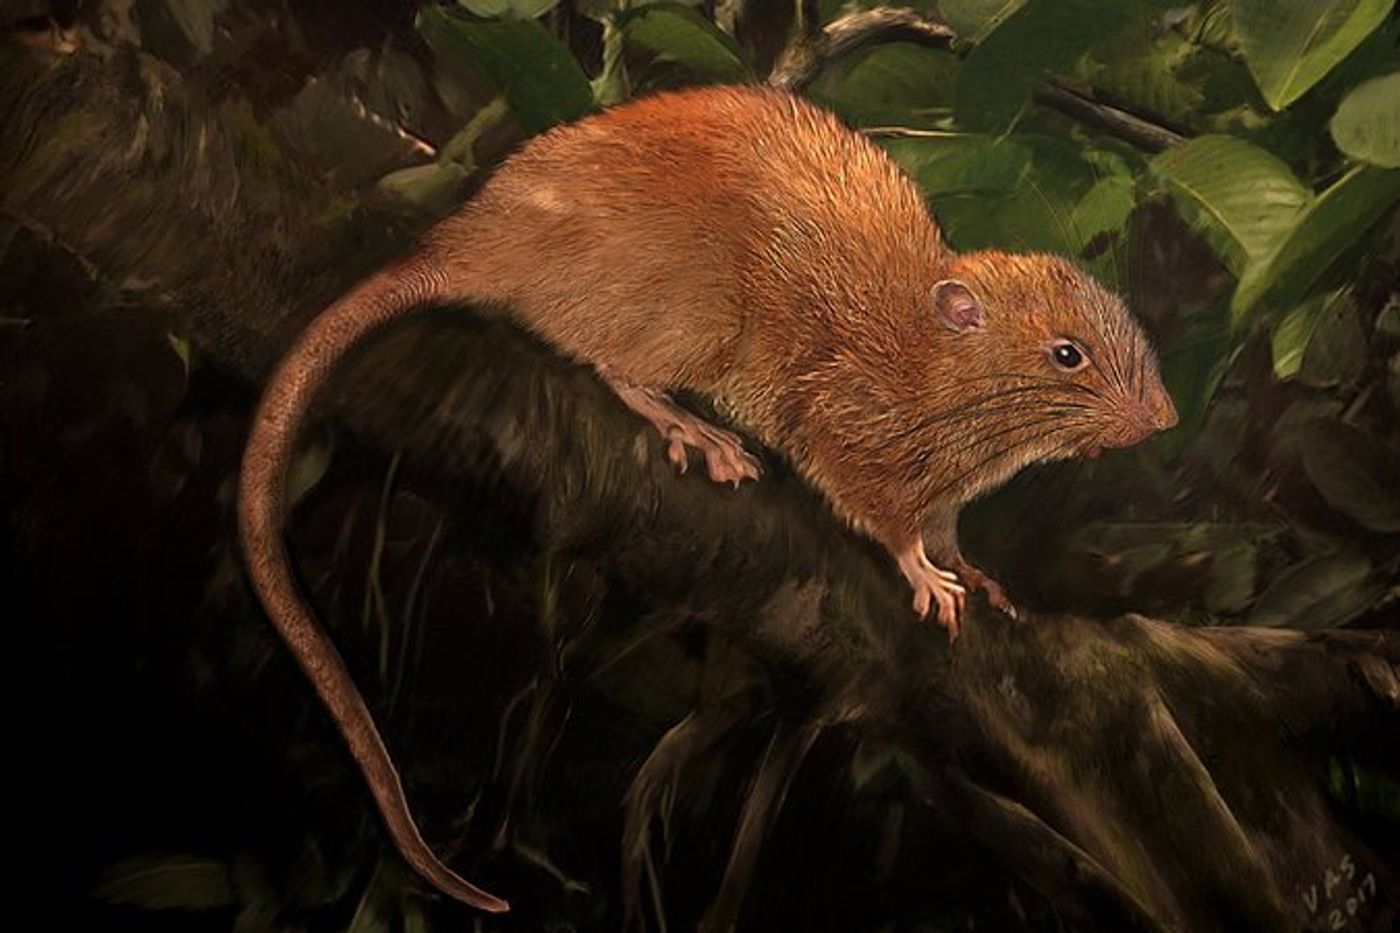 The Vika was the largest rat on the Solomon Islands. Although researchers have never seen one in person, their luck changed in 2015.